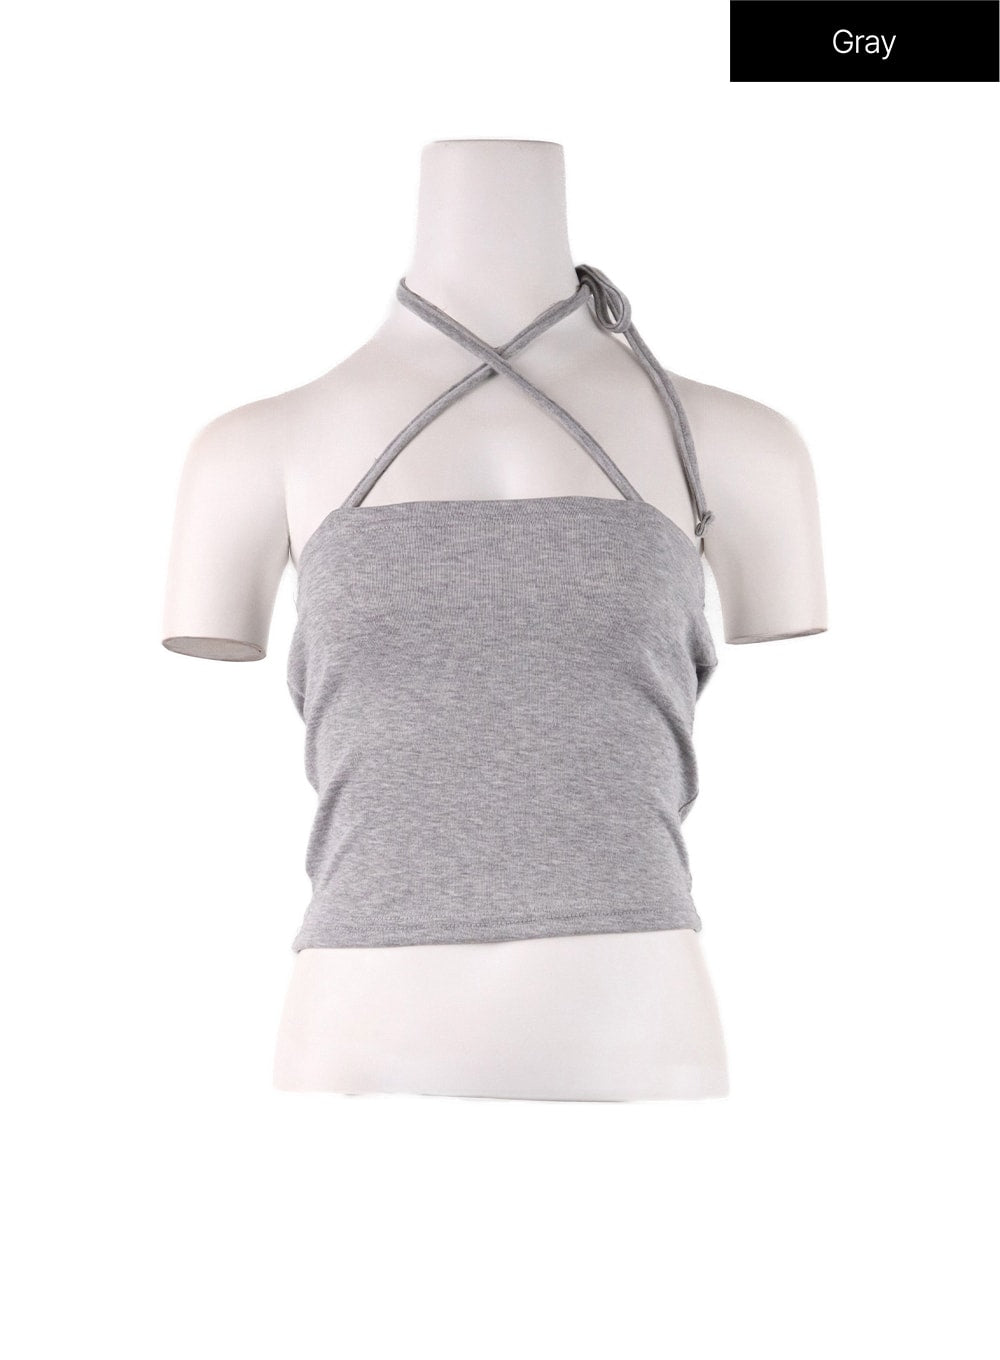 solid-halter-bowknot-cami-top-if408 / Gray